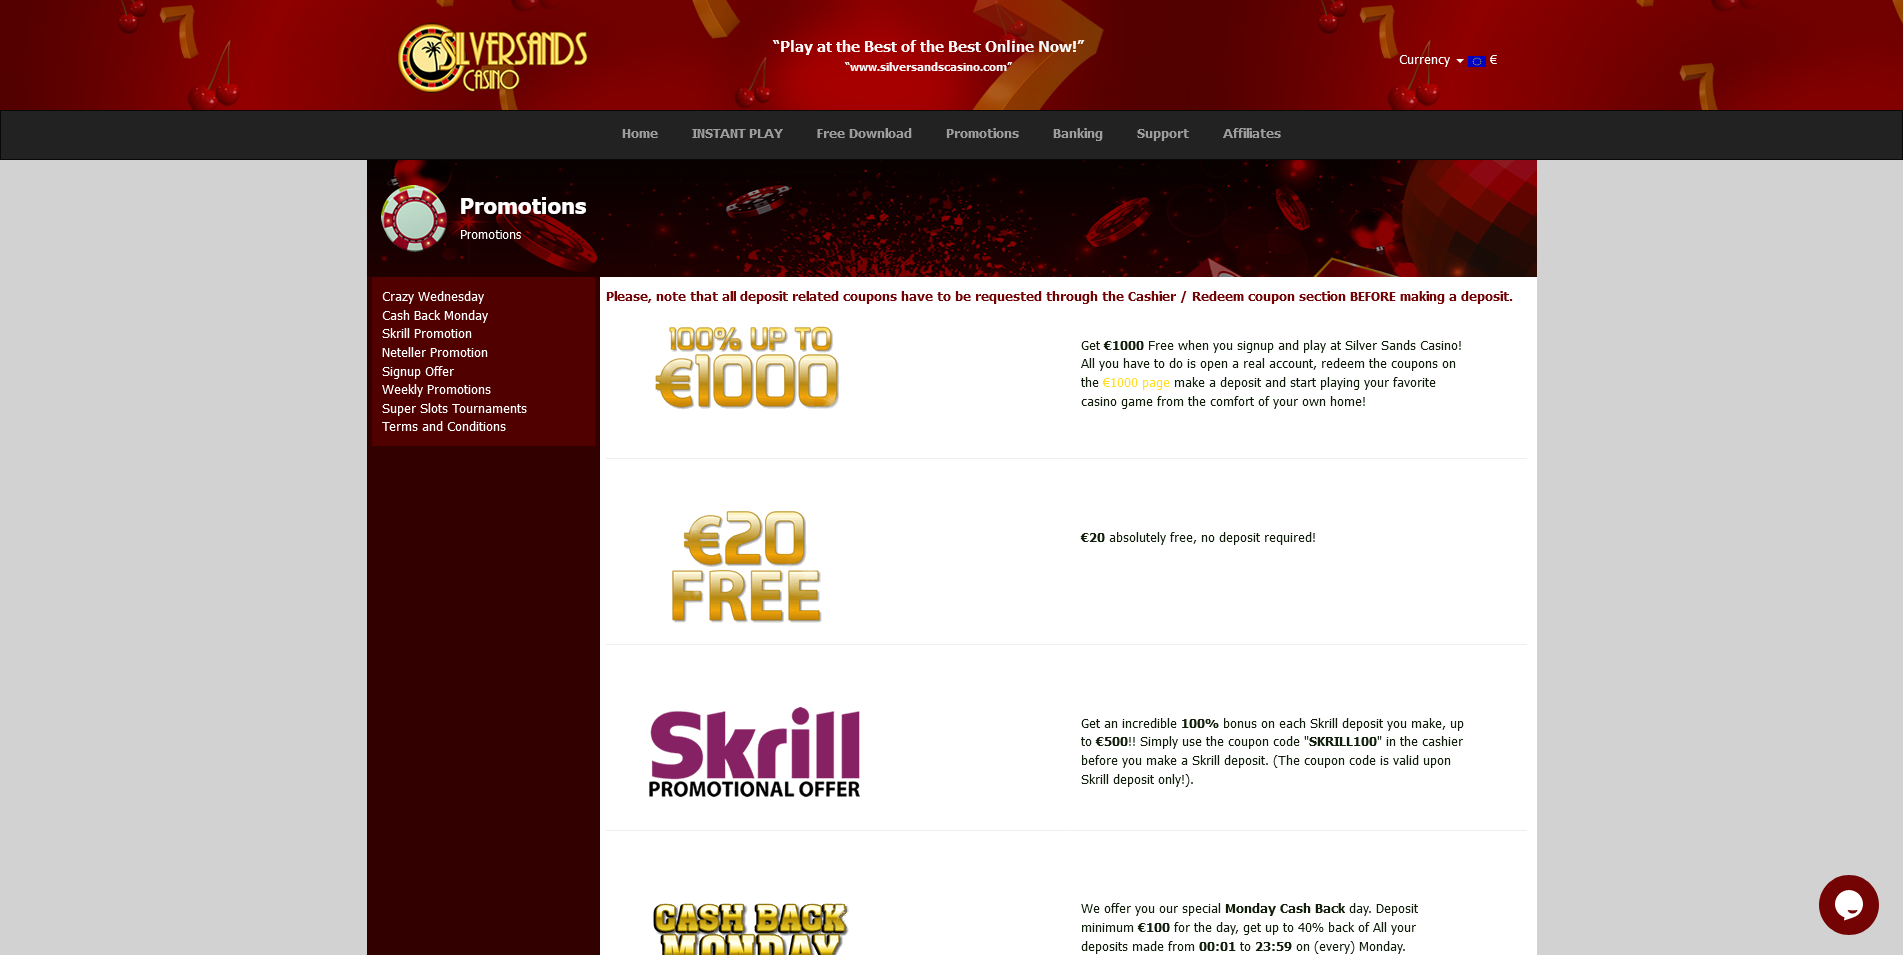 Screenshot of Promotions Page on SilverSands Casino site